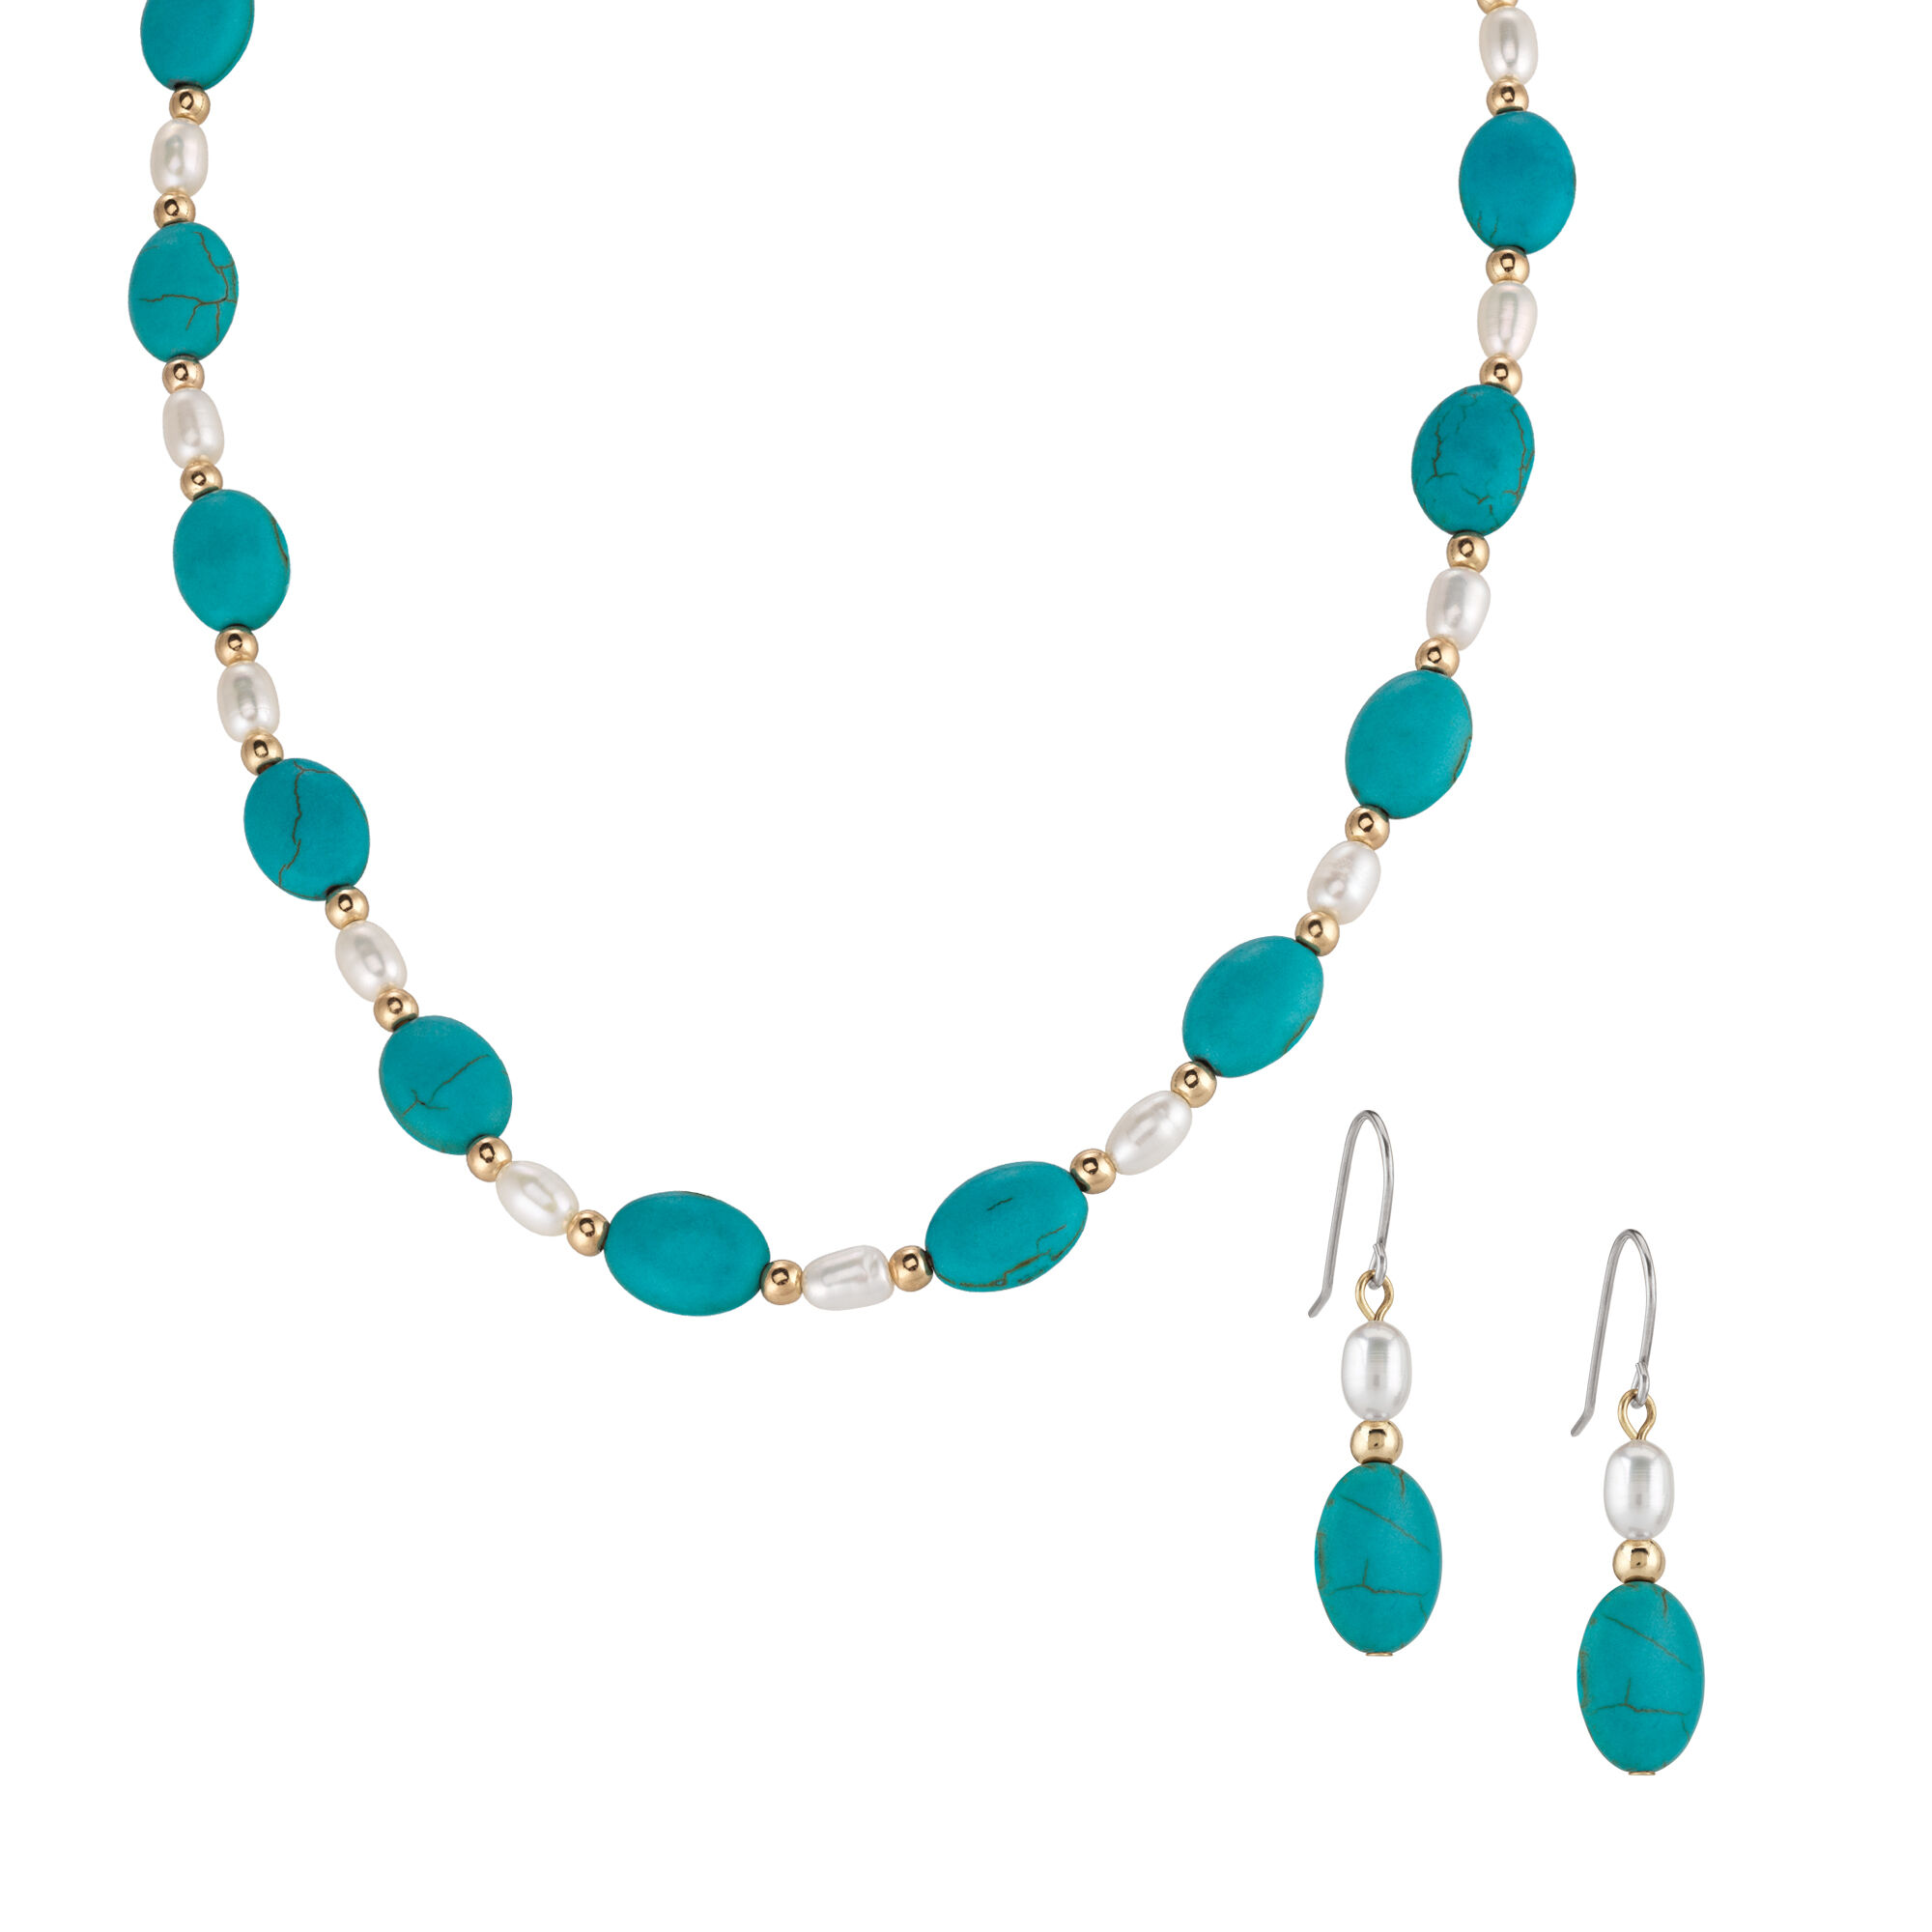 Turquoise Sea Necklace with FREE Matching Earrings